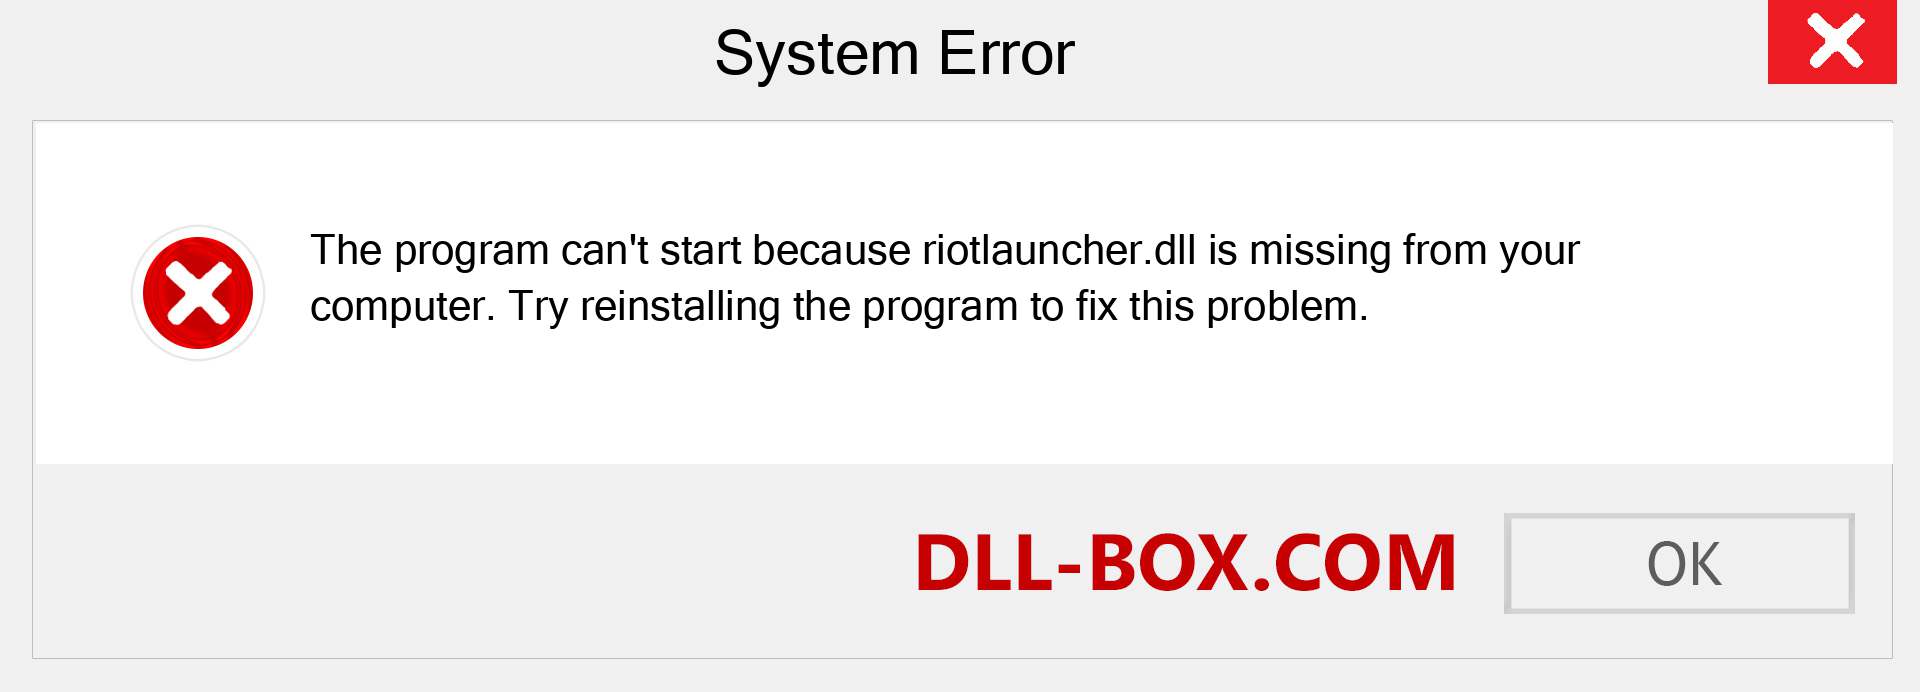  riotlauncher.dll file is missing?. Download for Windows 7, 8, 10 - Fix  riotlauncher dll Missing Error on Windows, photos, images